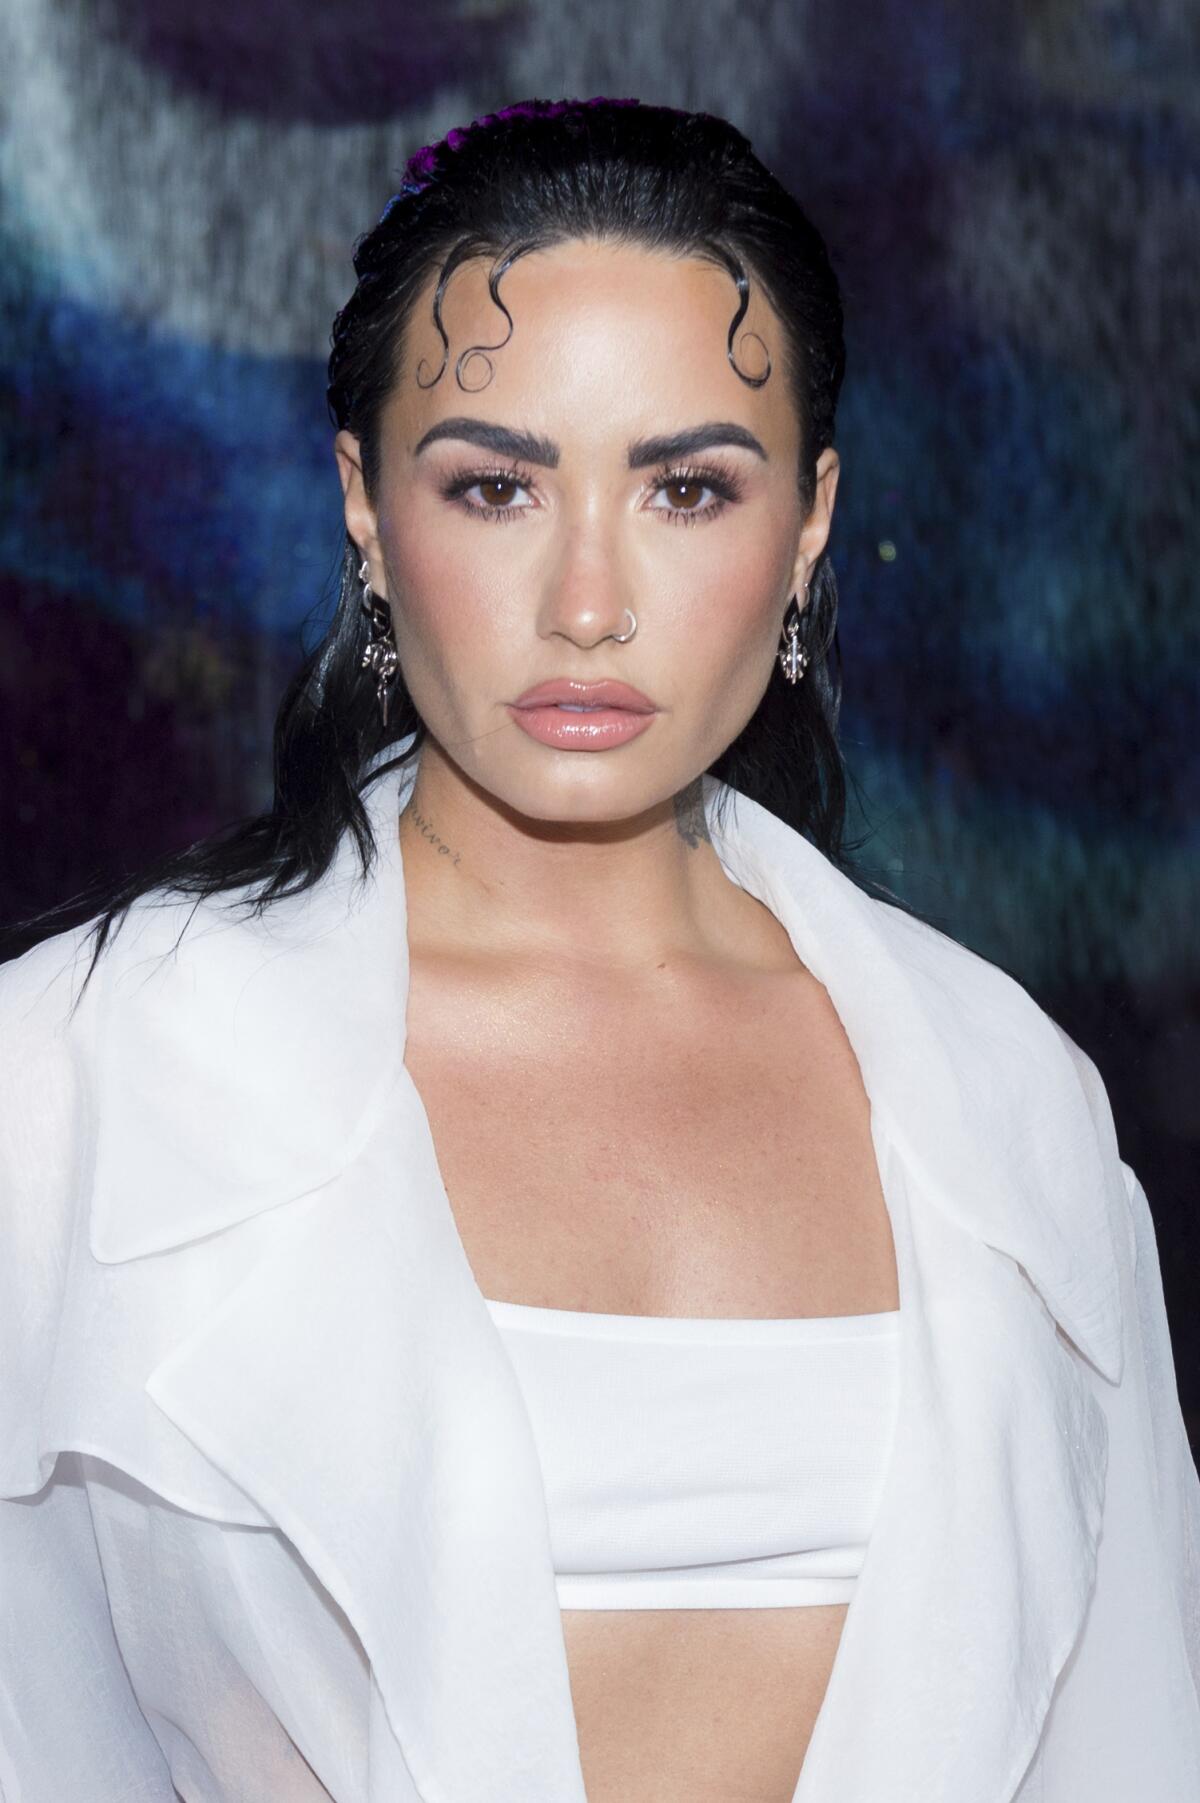 Demi Lovato wears a white bralette and shirt as she poses for photos at a red carpet event